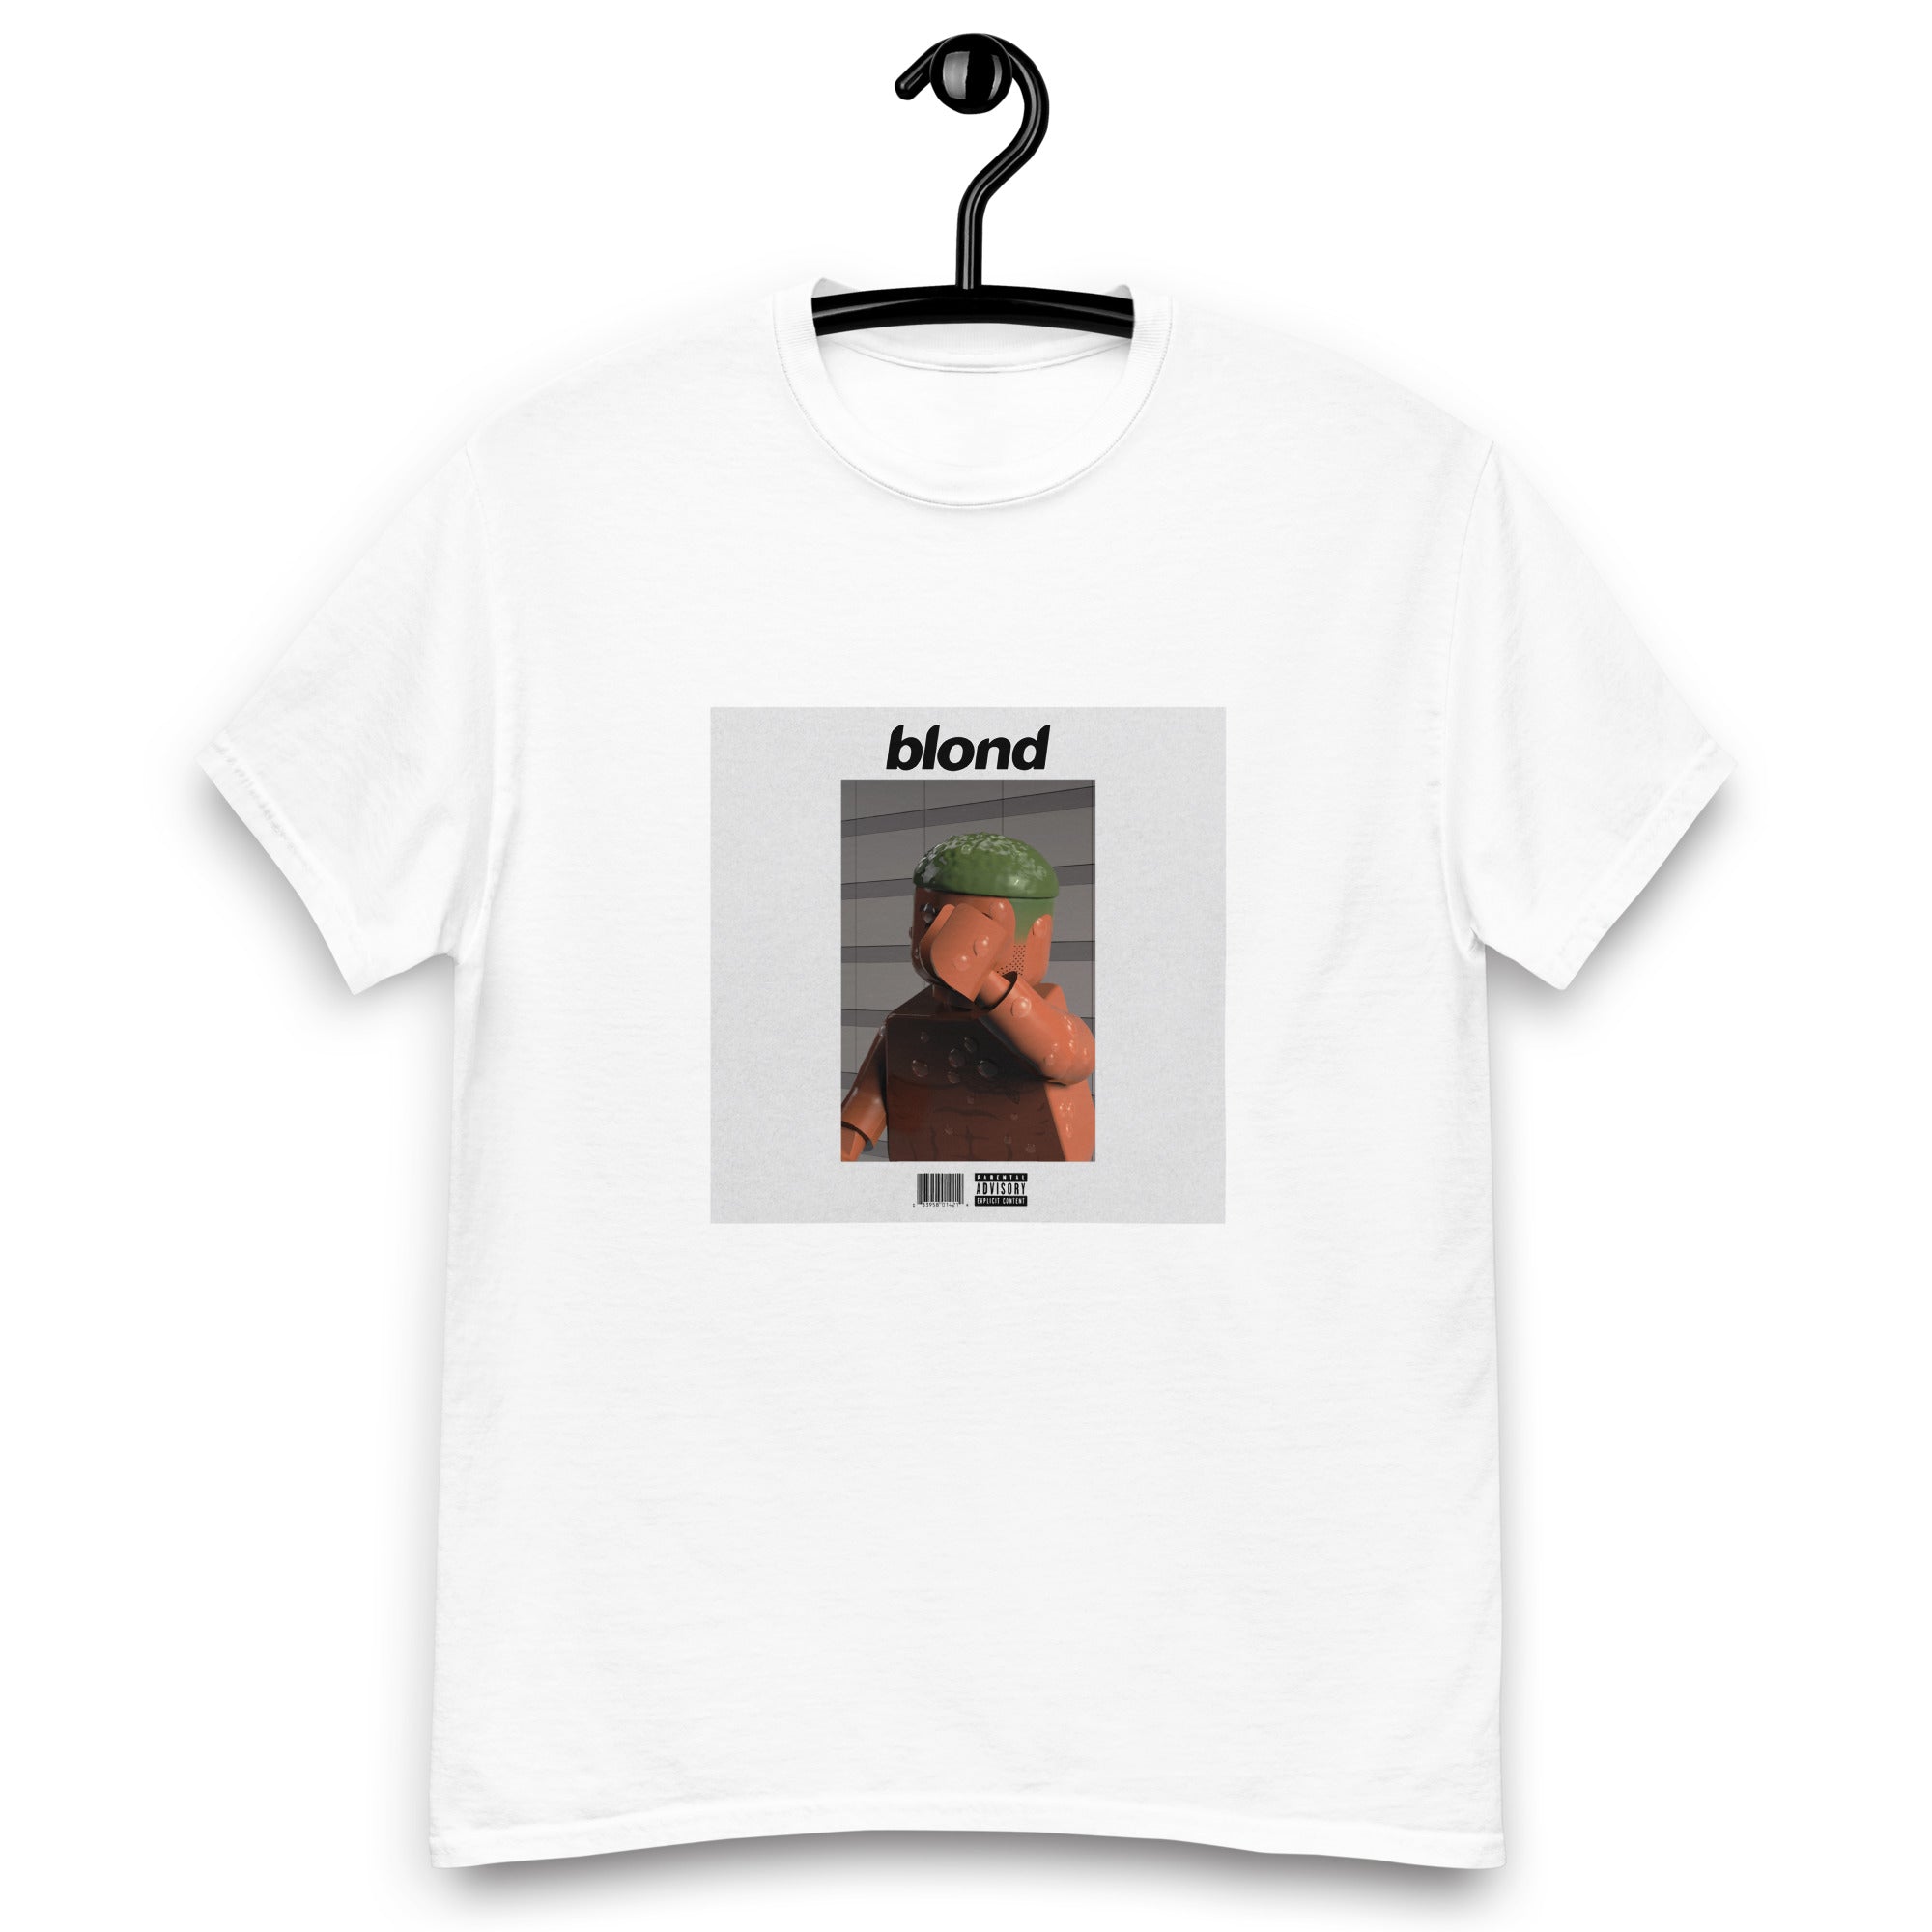 BLONDED Men's Fashion Graphic Print Merch by Frank Ocean PrEP T